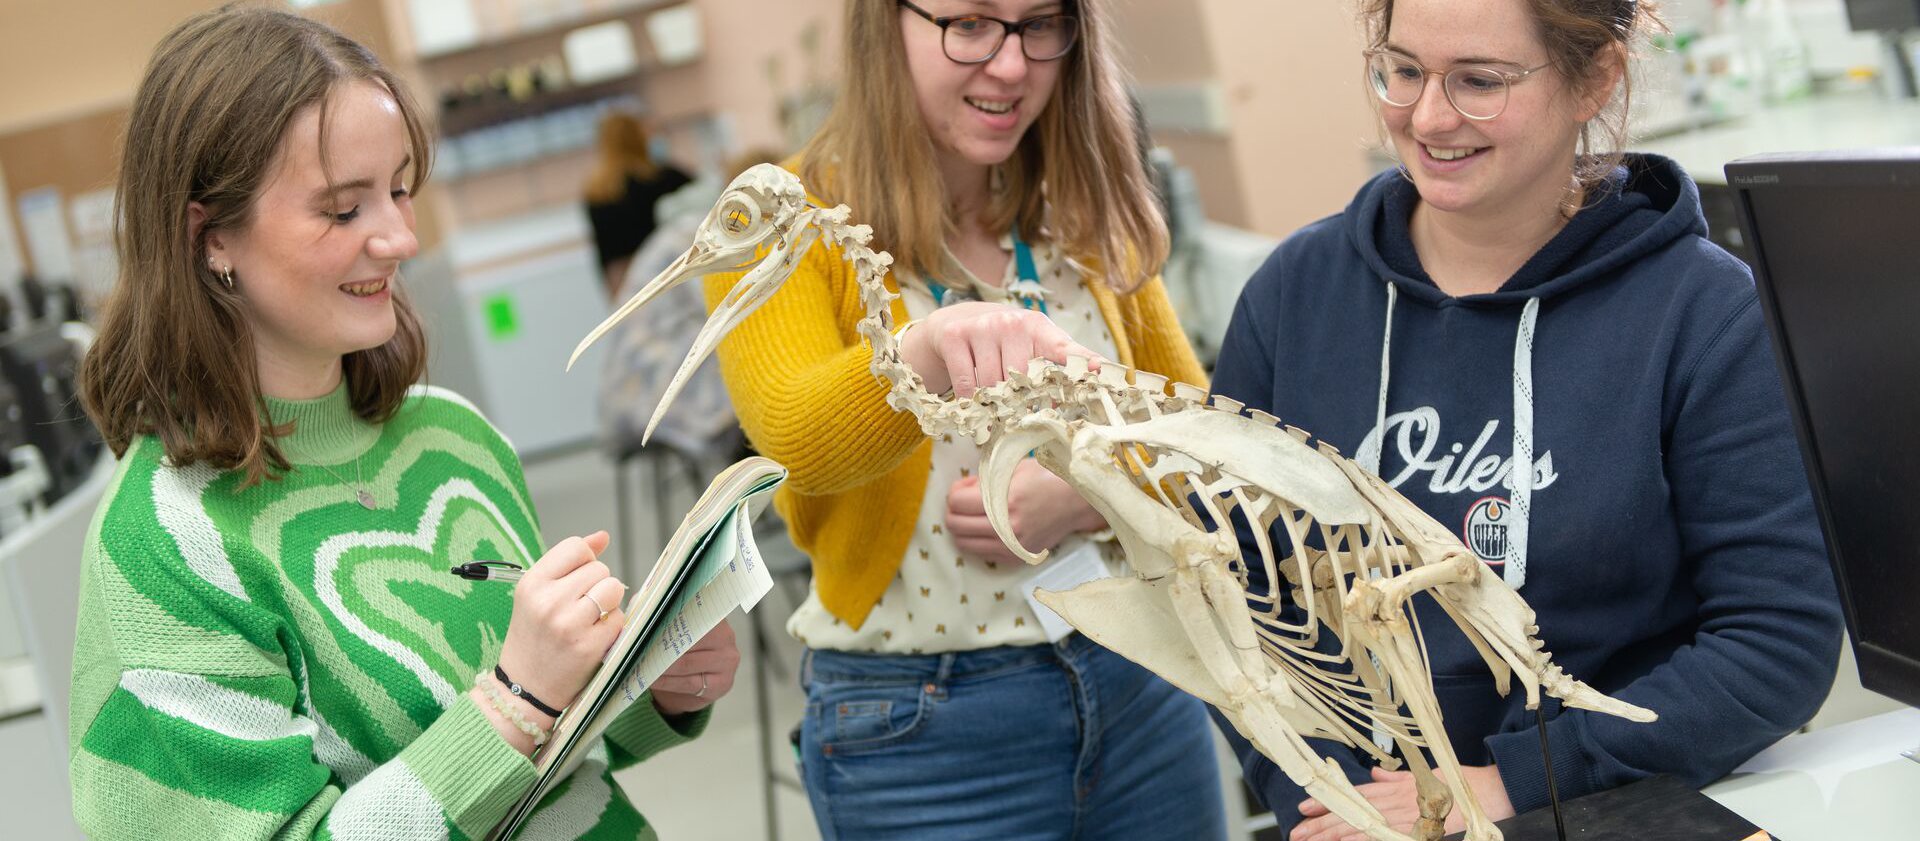 BSc (Hons) Zoology Course | University of Hull